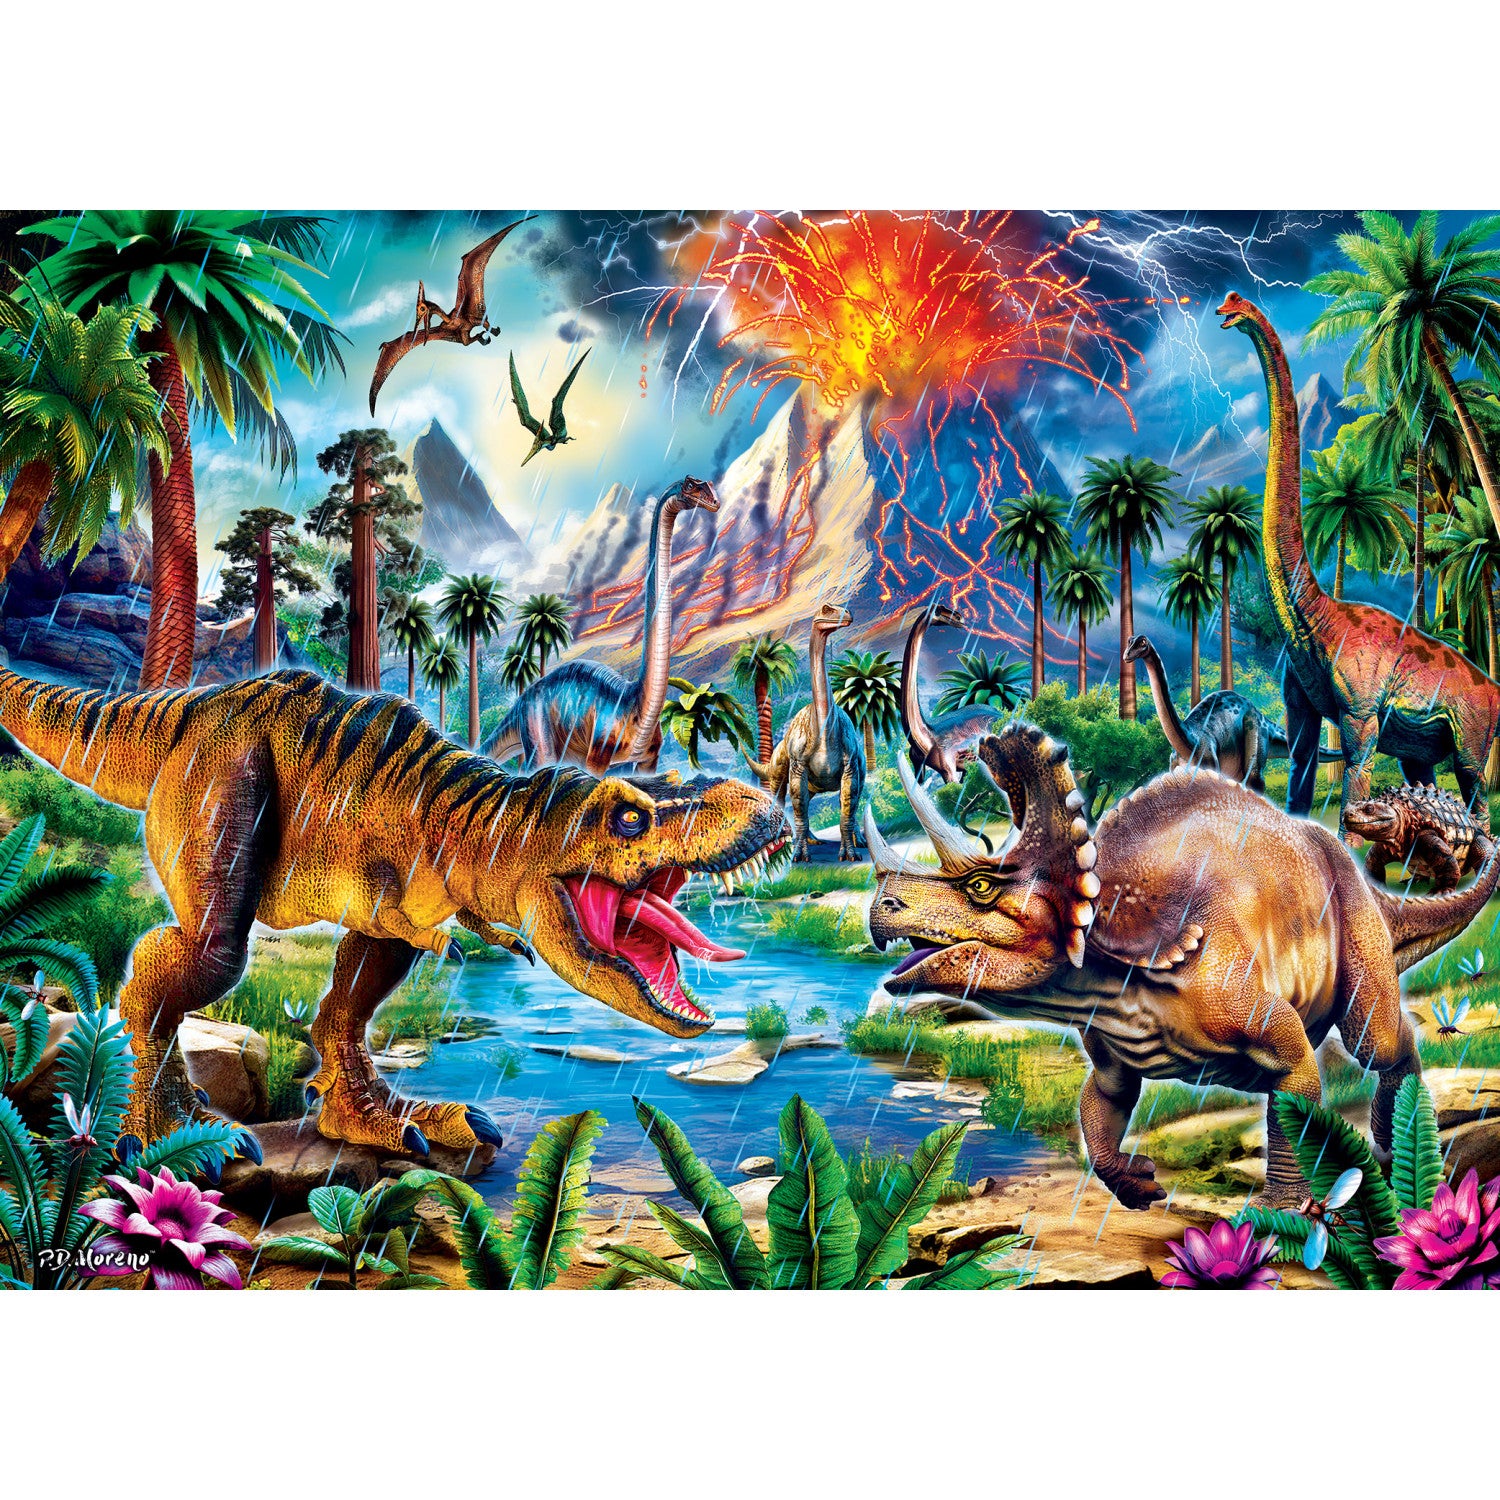 Glow in the Dark - Dinosaurs 1000 Piece Puzzle